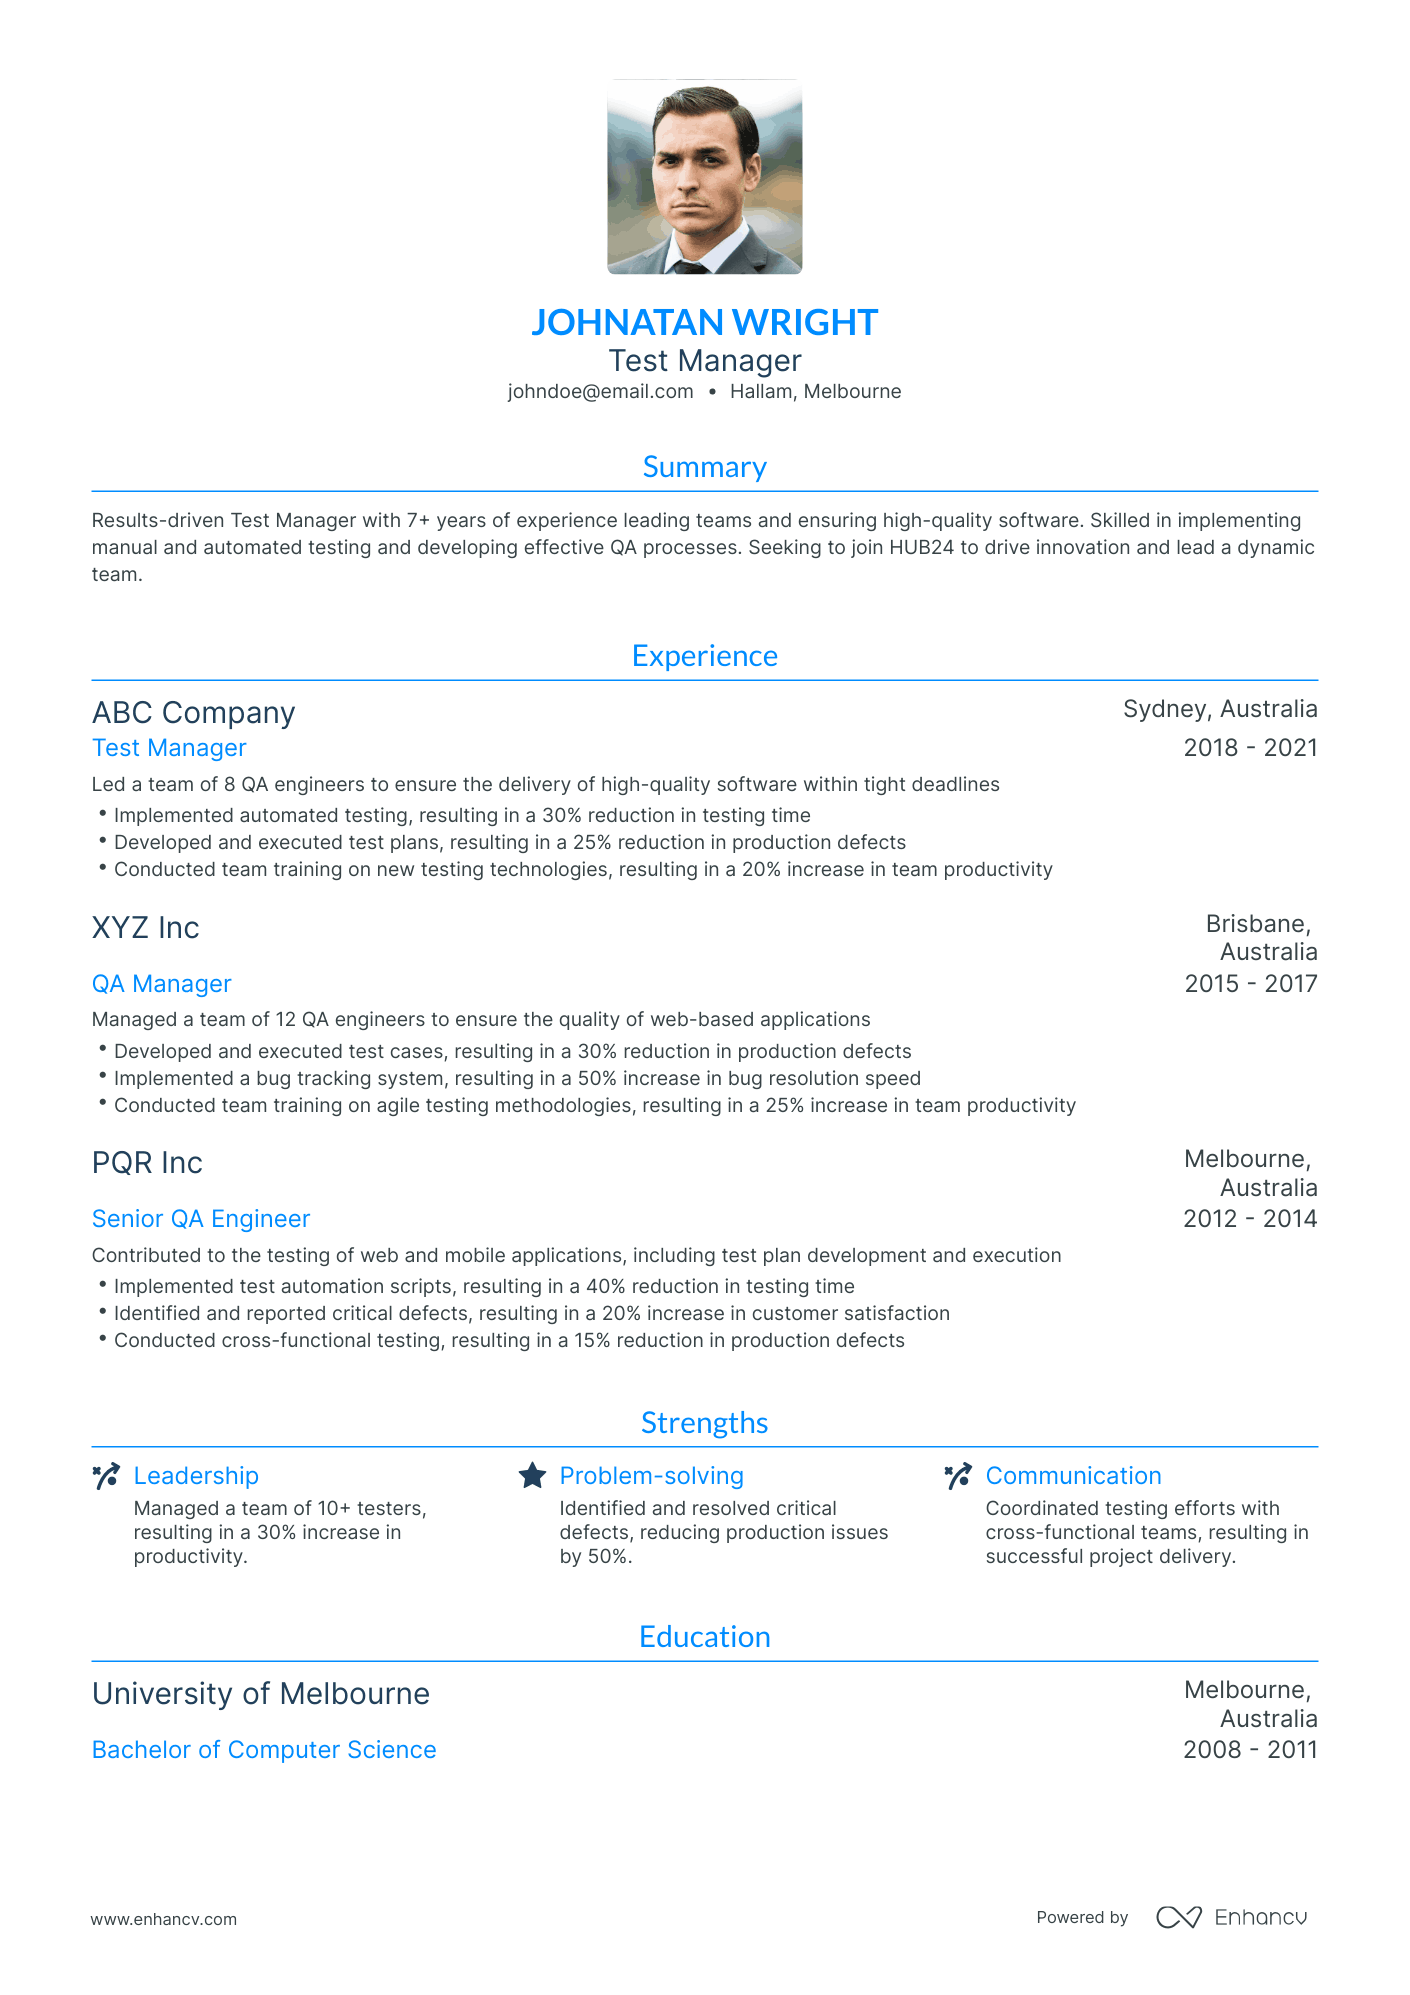 Traditional Test Manager Resume Template